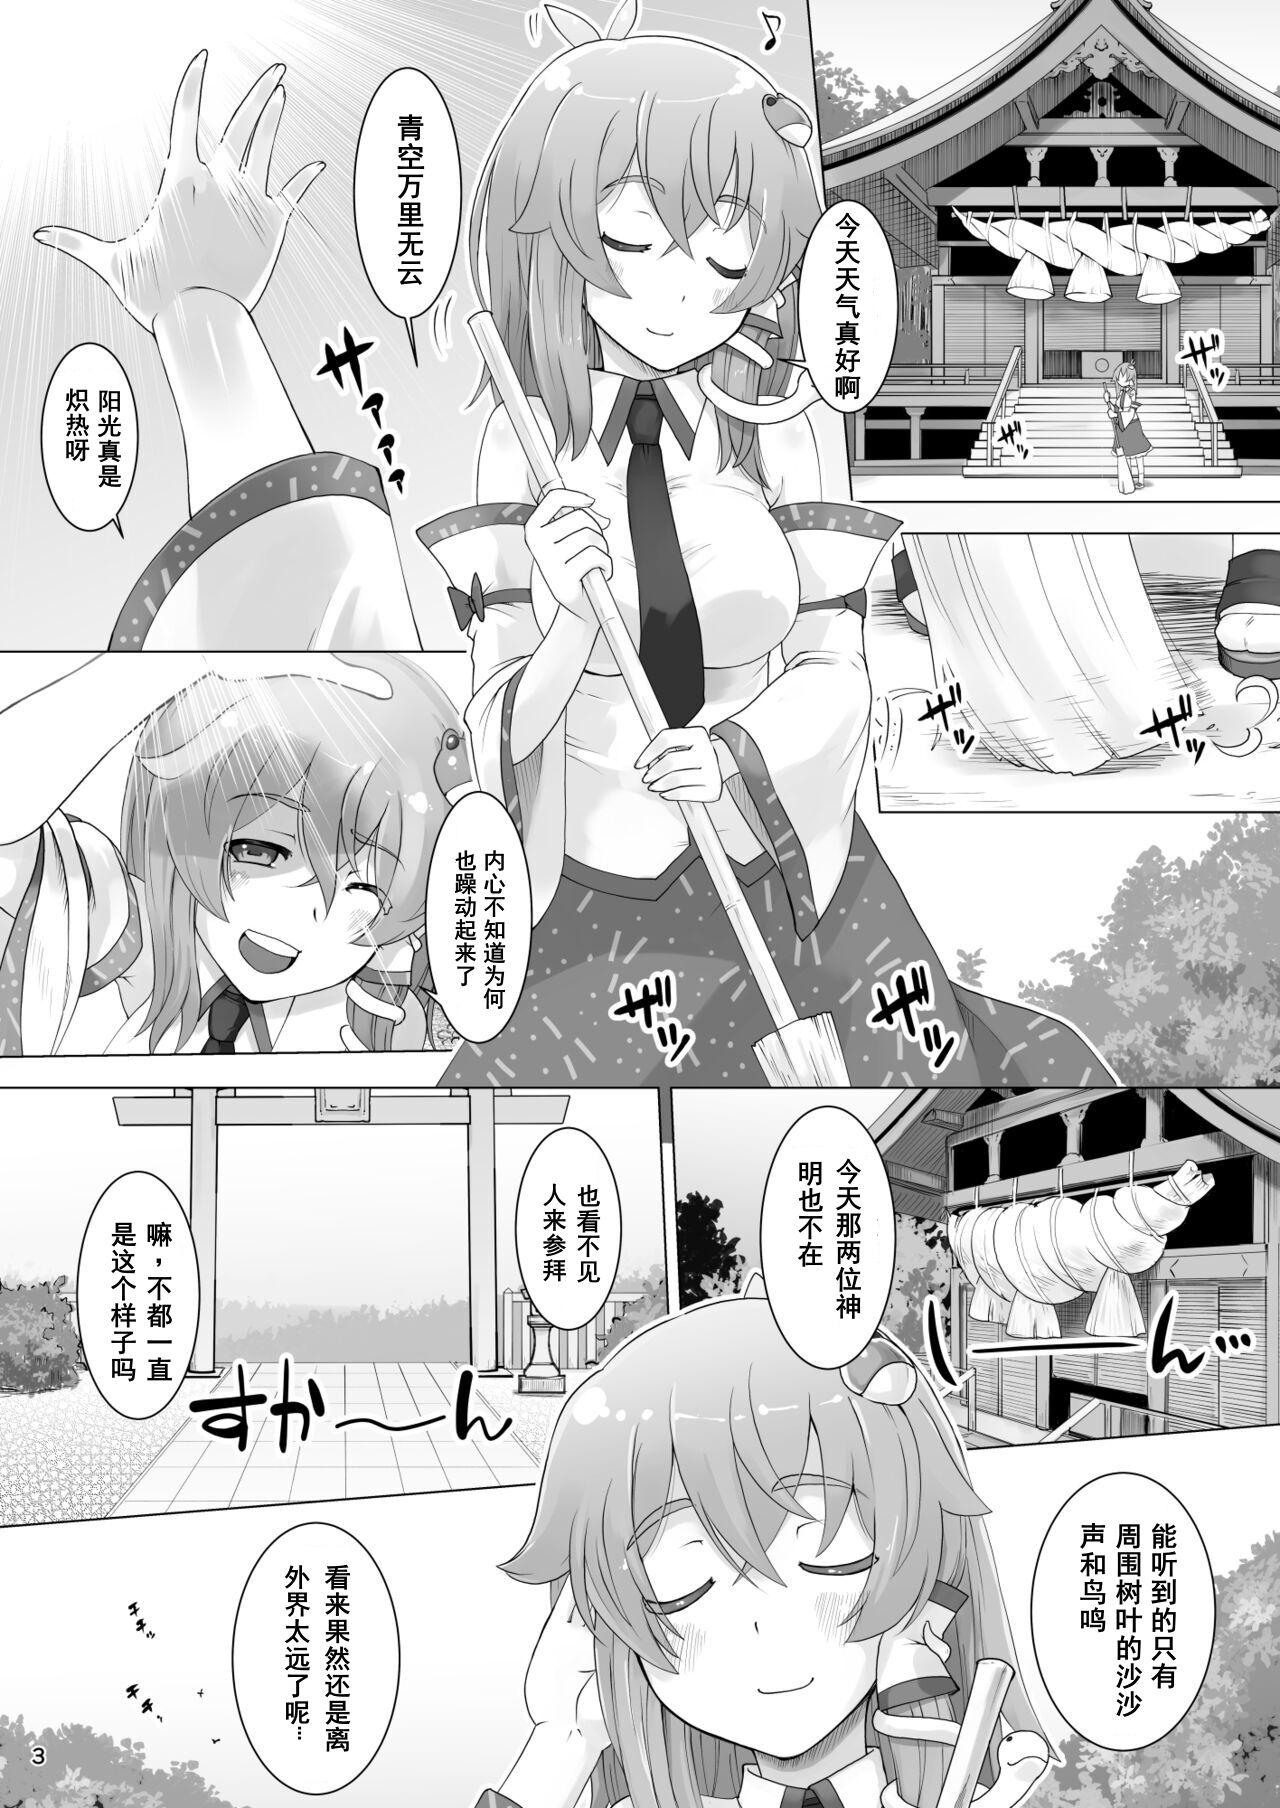 Cum On Ass hare no hi 〇 Nari（Chinese) - Touhou project Naked Sluts - Page 3